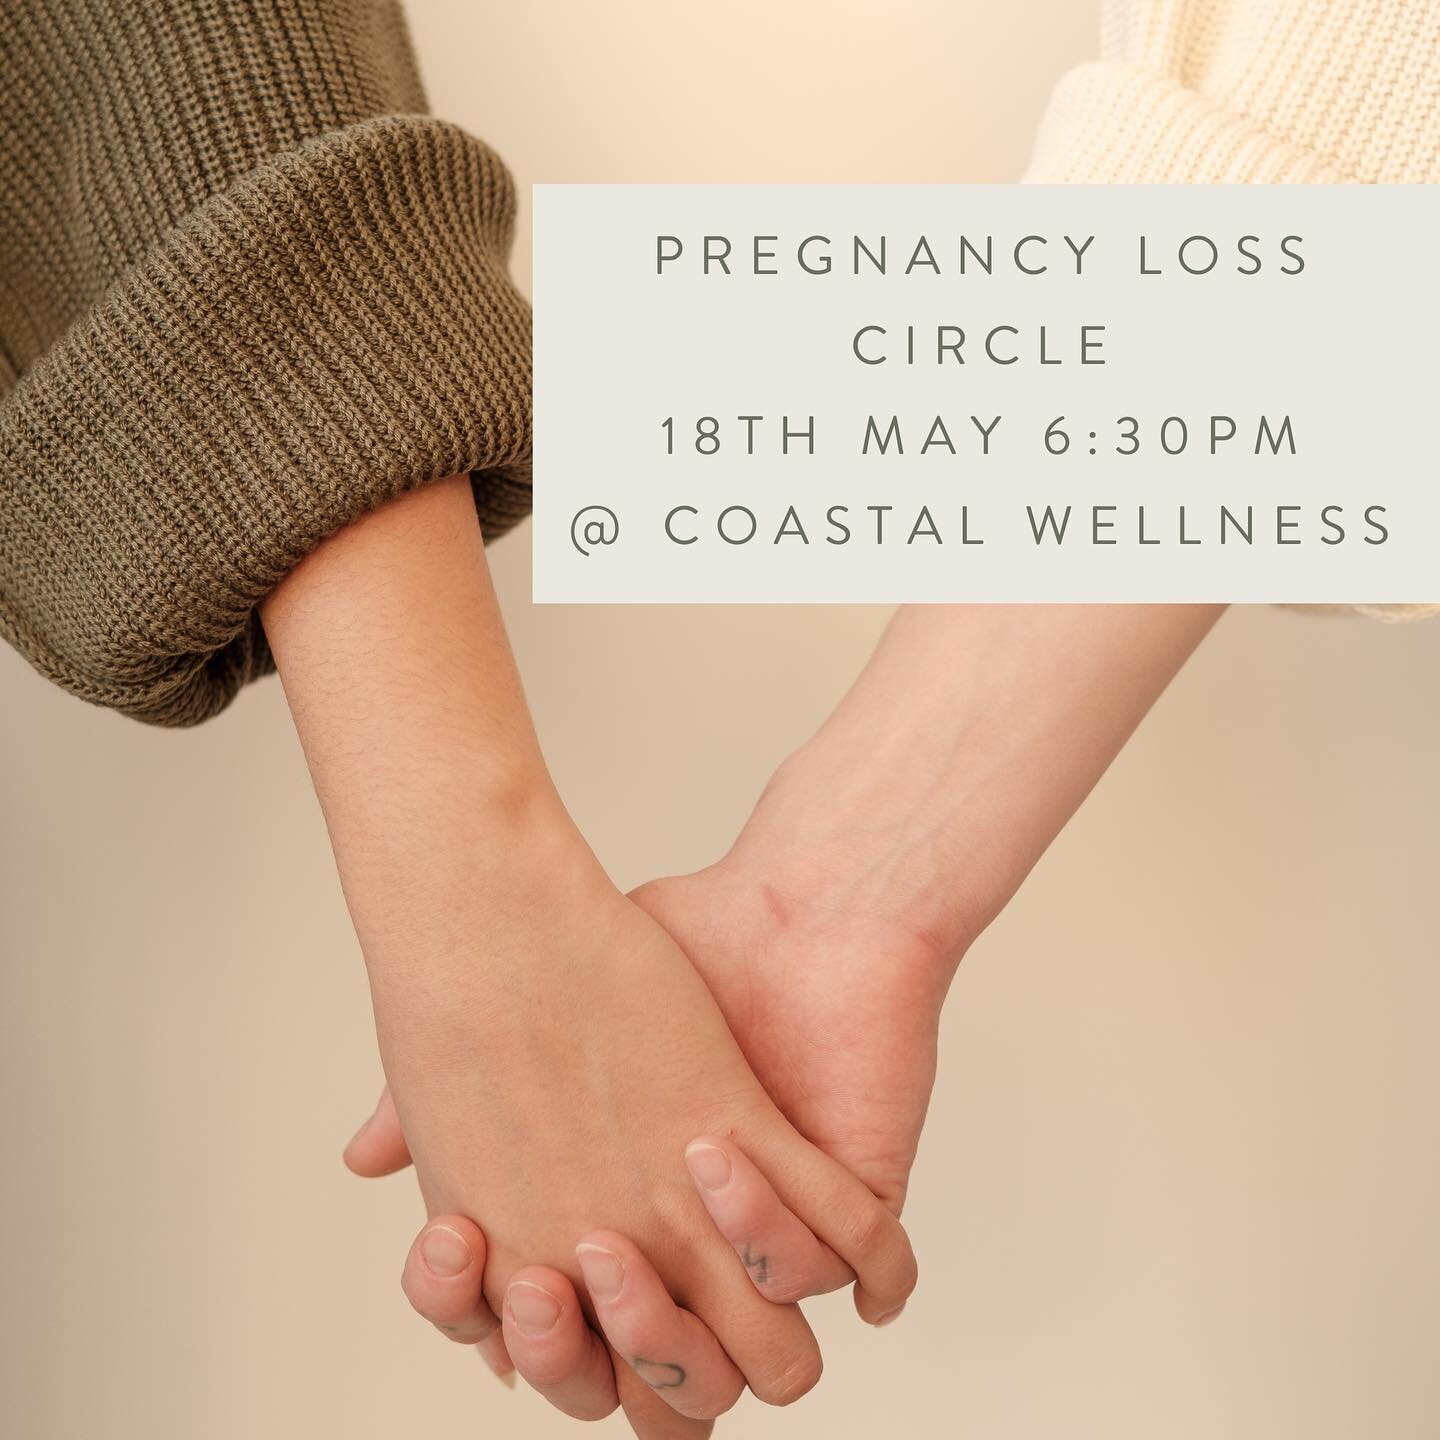 Processing our experiences is an essential part of our healing journey.

The statistics of pregnancy loss is 1 in 4 women will experience a miscarriage in their lives. 

Jenna from The Seed Collective has been guided to bring this circle to Central C